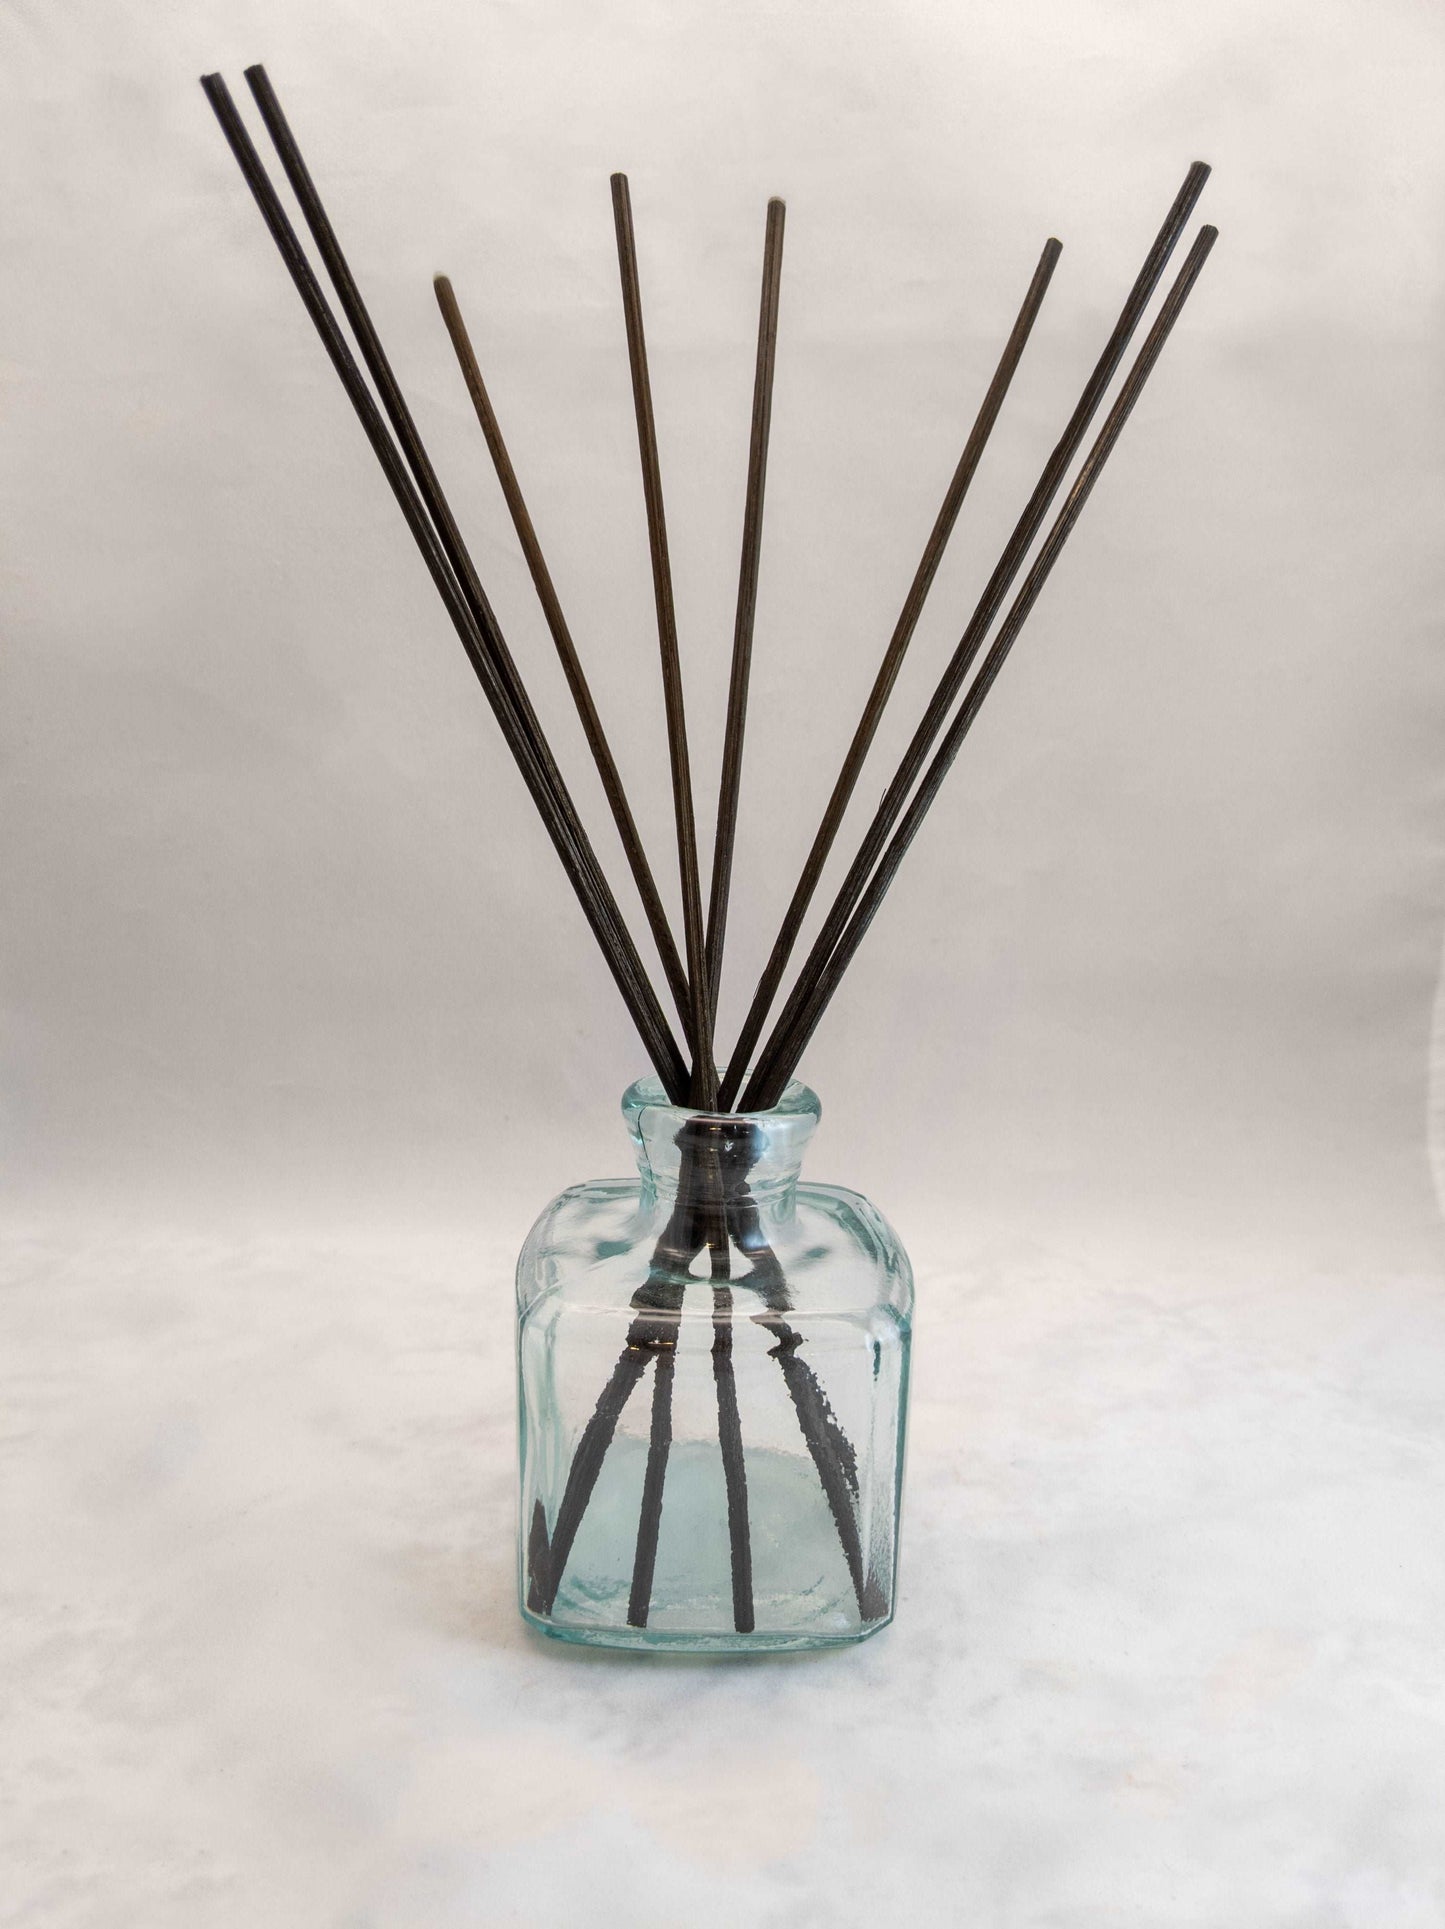 Reed Diffuser Refill